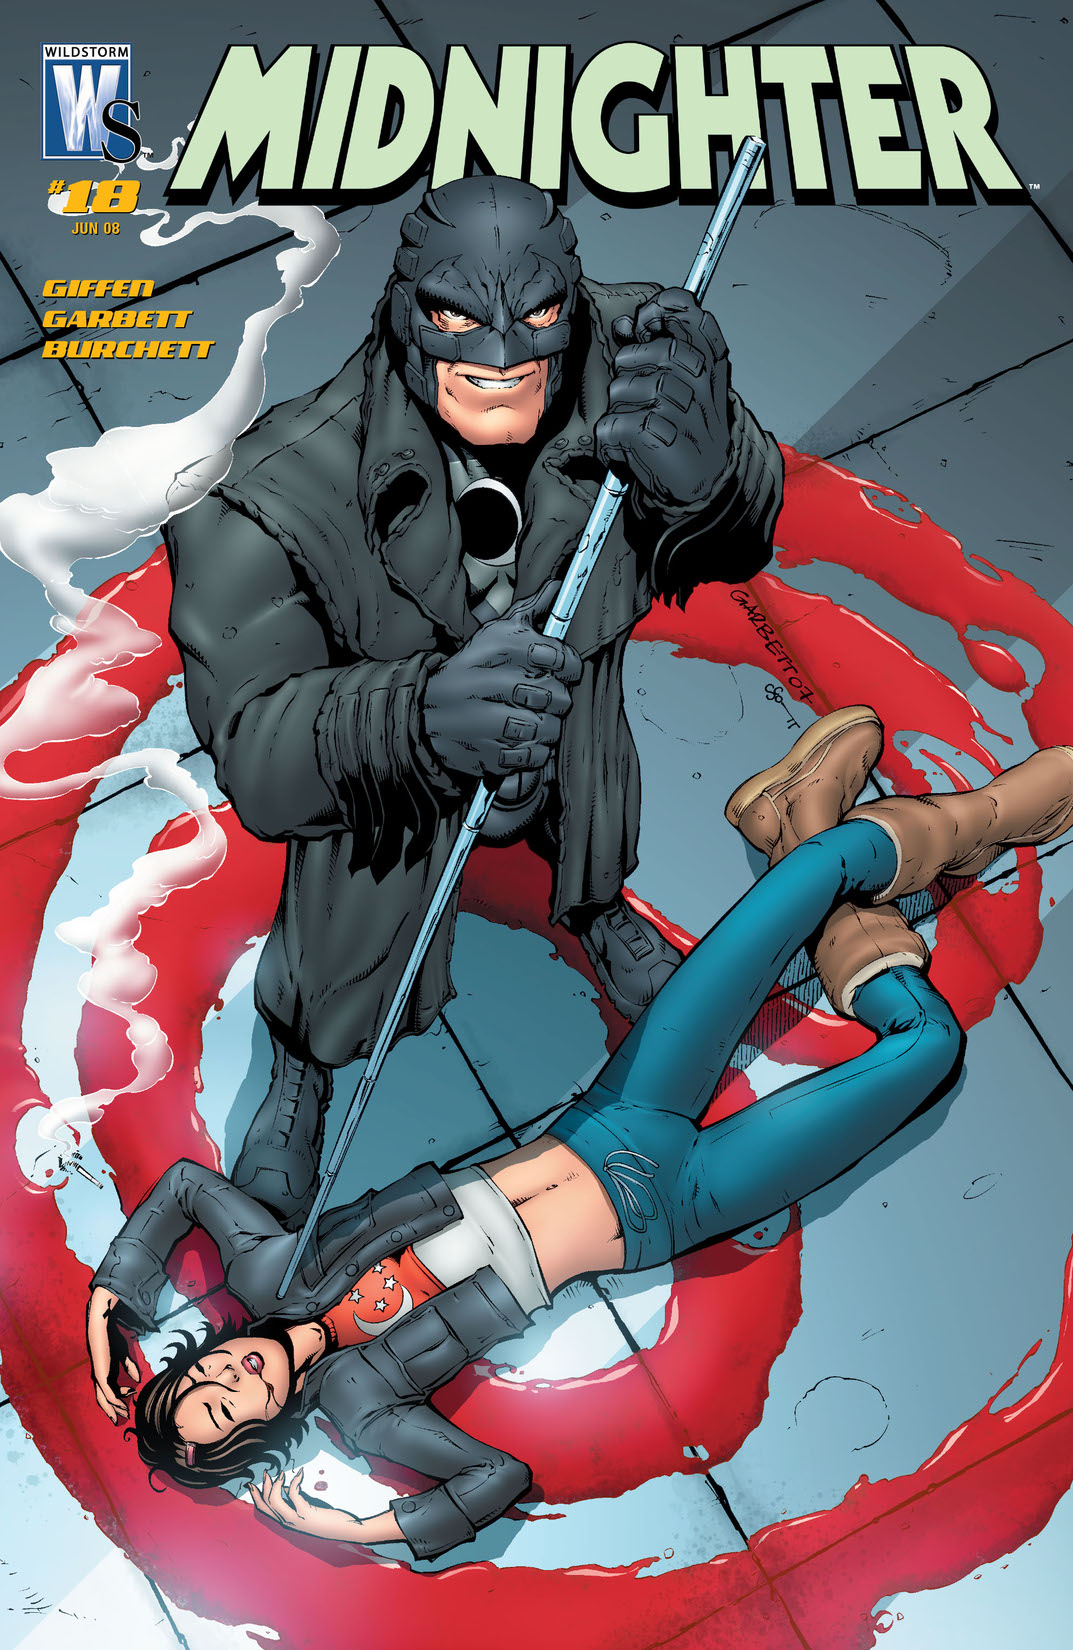 Midnighter (2006-) #18 preview images